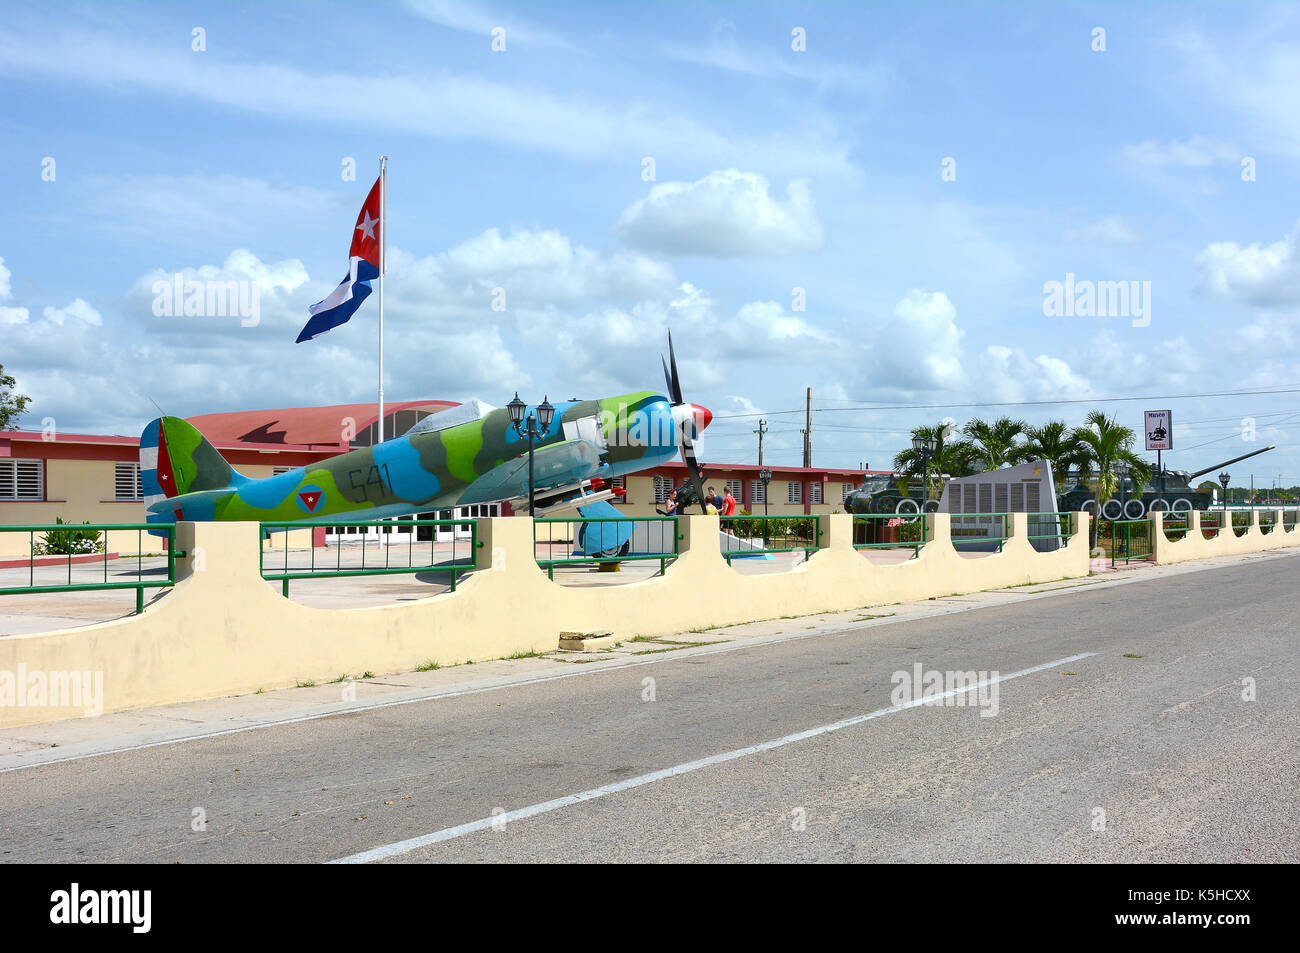 PLAYA GIRON, CUBA - JULY 24, 2016: The Bay of Pigs Museum. Vintage plane, tanks and artillery in front of the museum dedicated to the failed 1961 inva Stock Photo